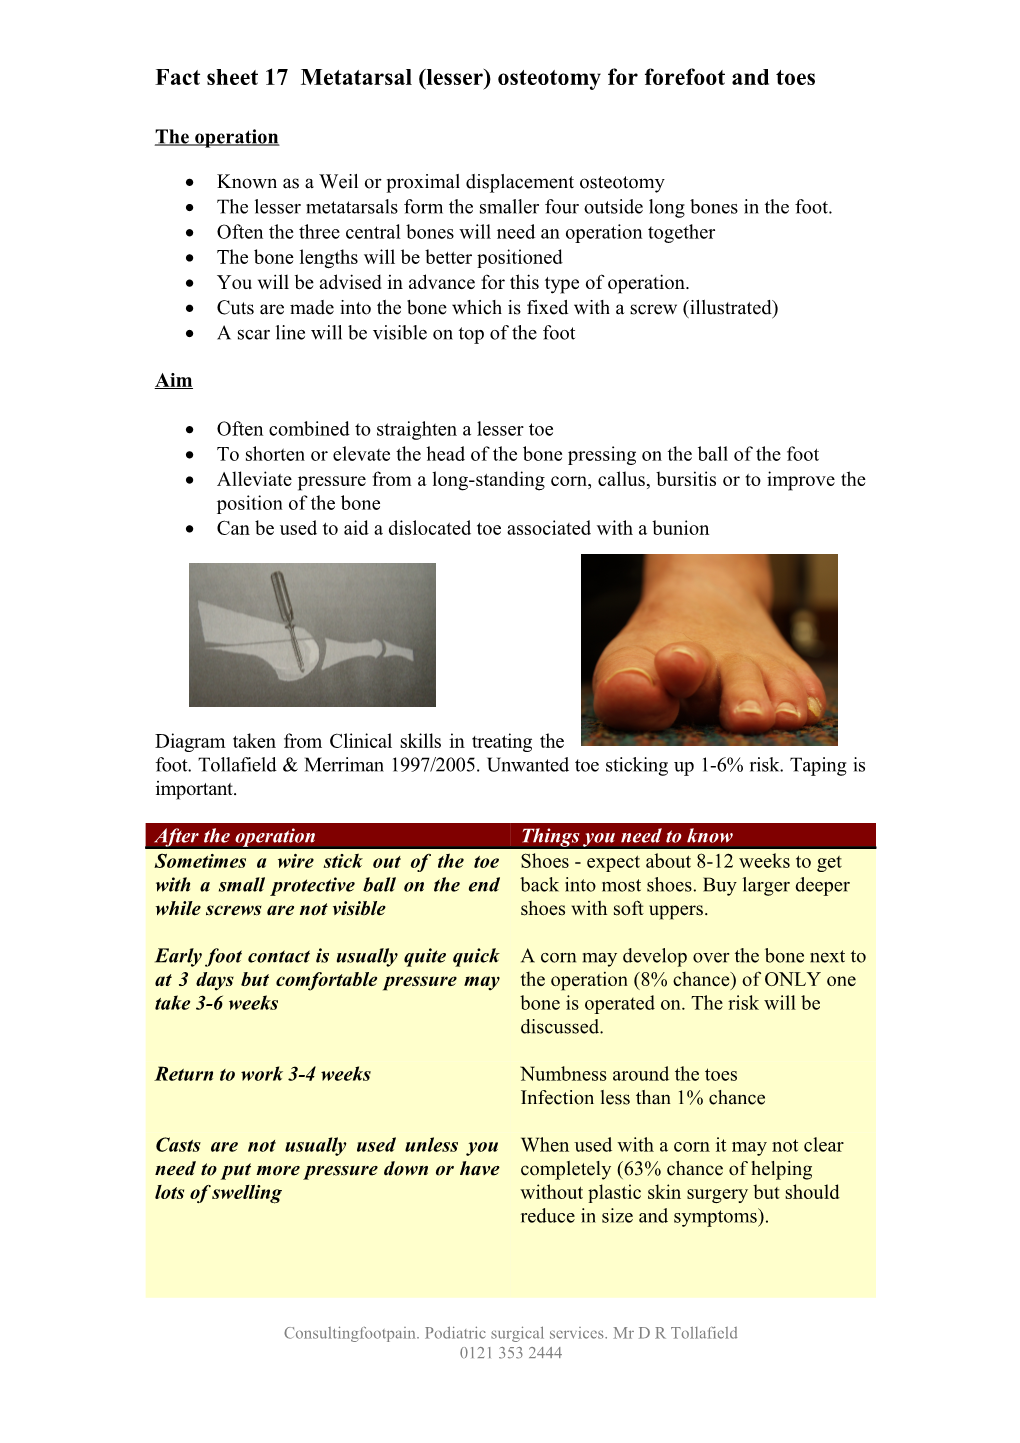 Fact Sheet 17 Metatarsal (Lesser) Osteotomy for Forefoot and Toes